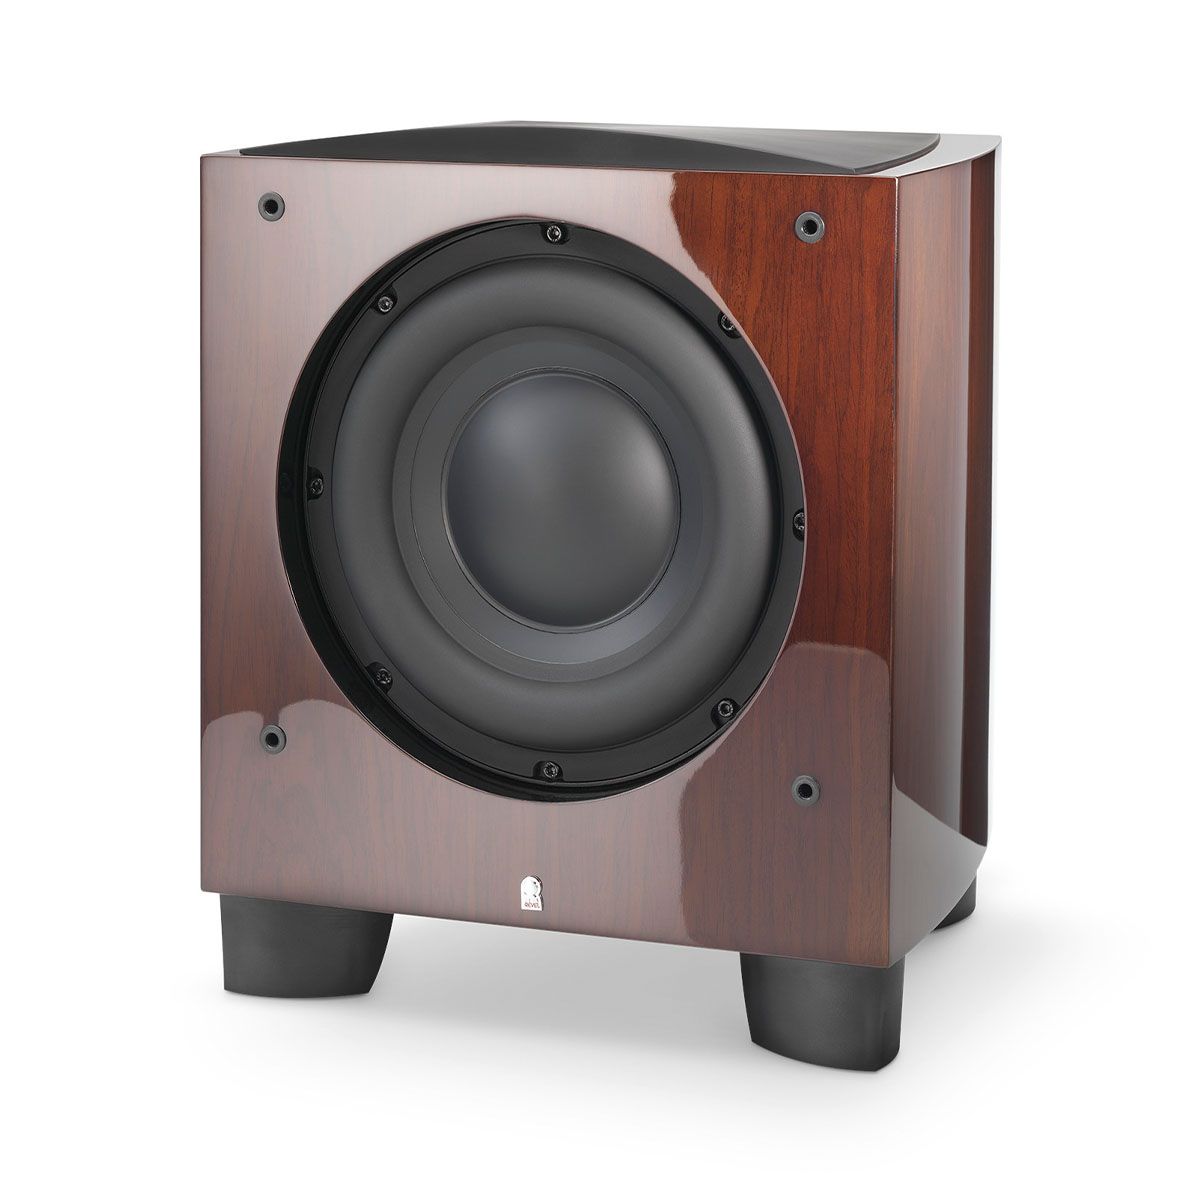 Revel B110v2 10” 1000W Powered Subwoofer - single walnut without grille - angled front view